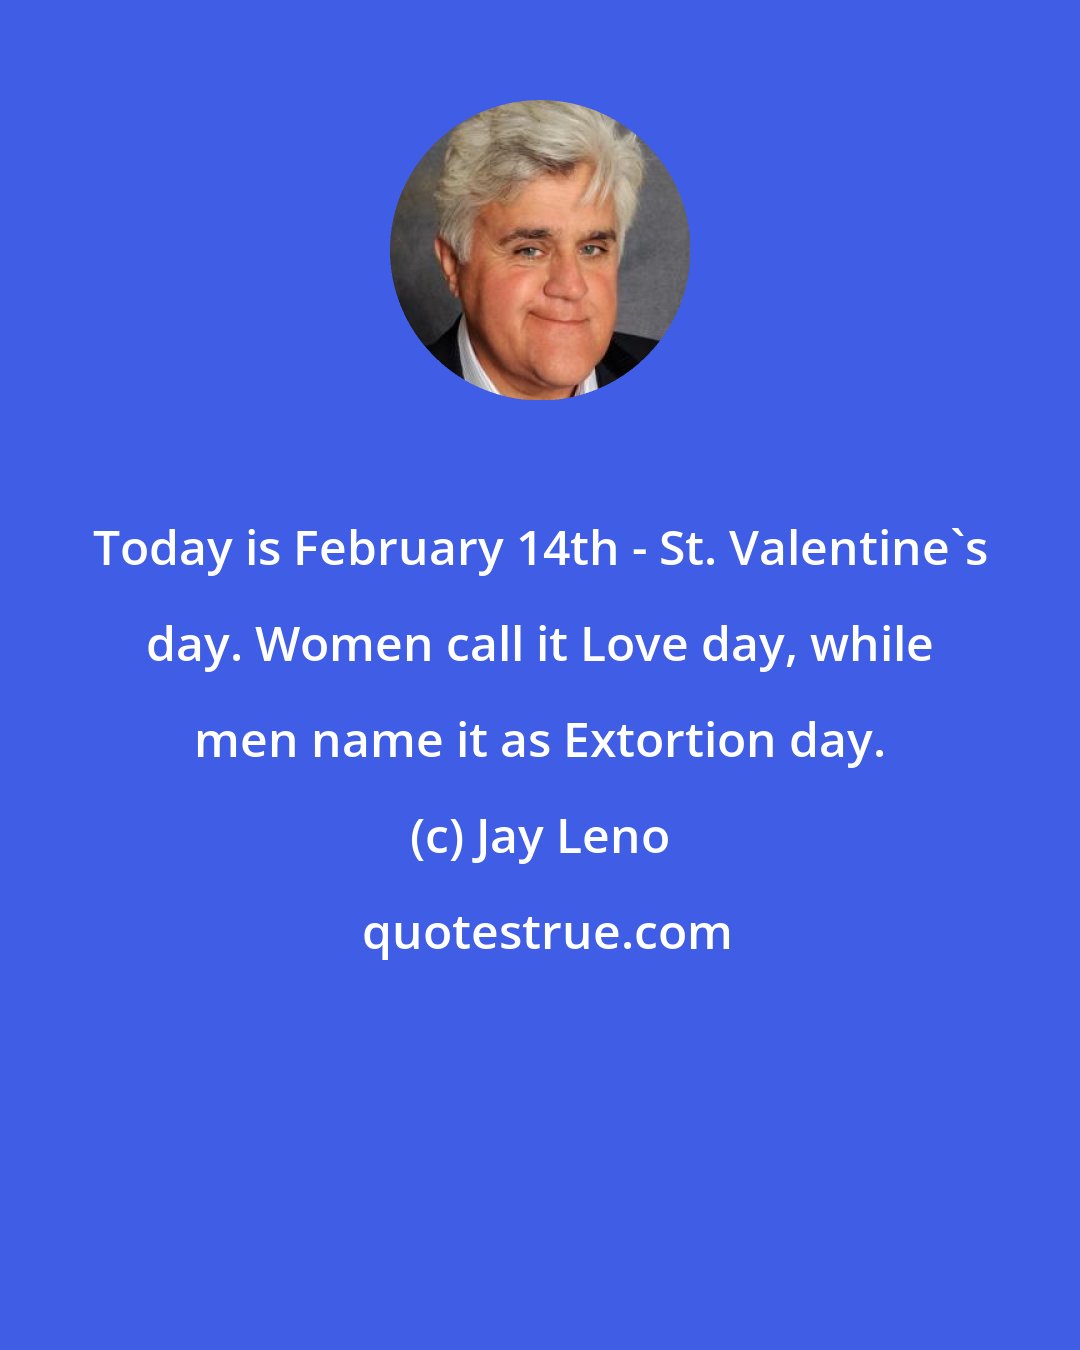 Jay Leno: Today is February 14th - St. Valentine's day. Women call it Love day, while men name it as Extortion day.